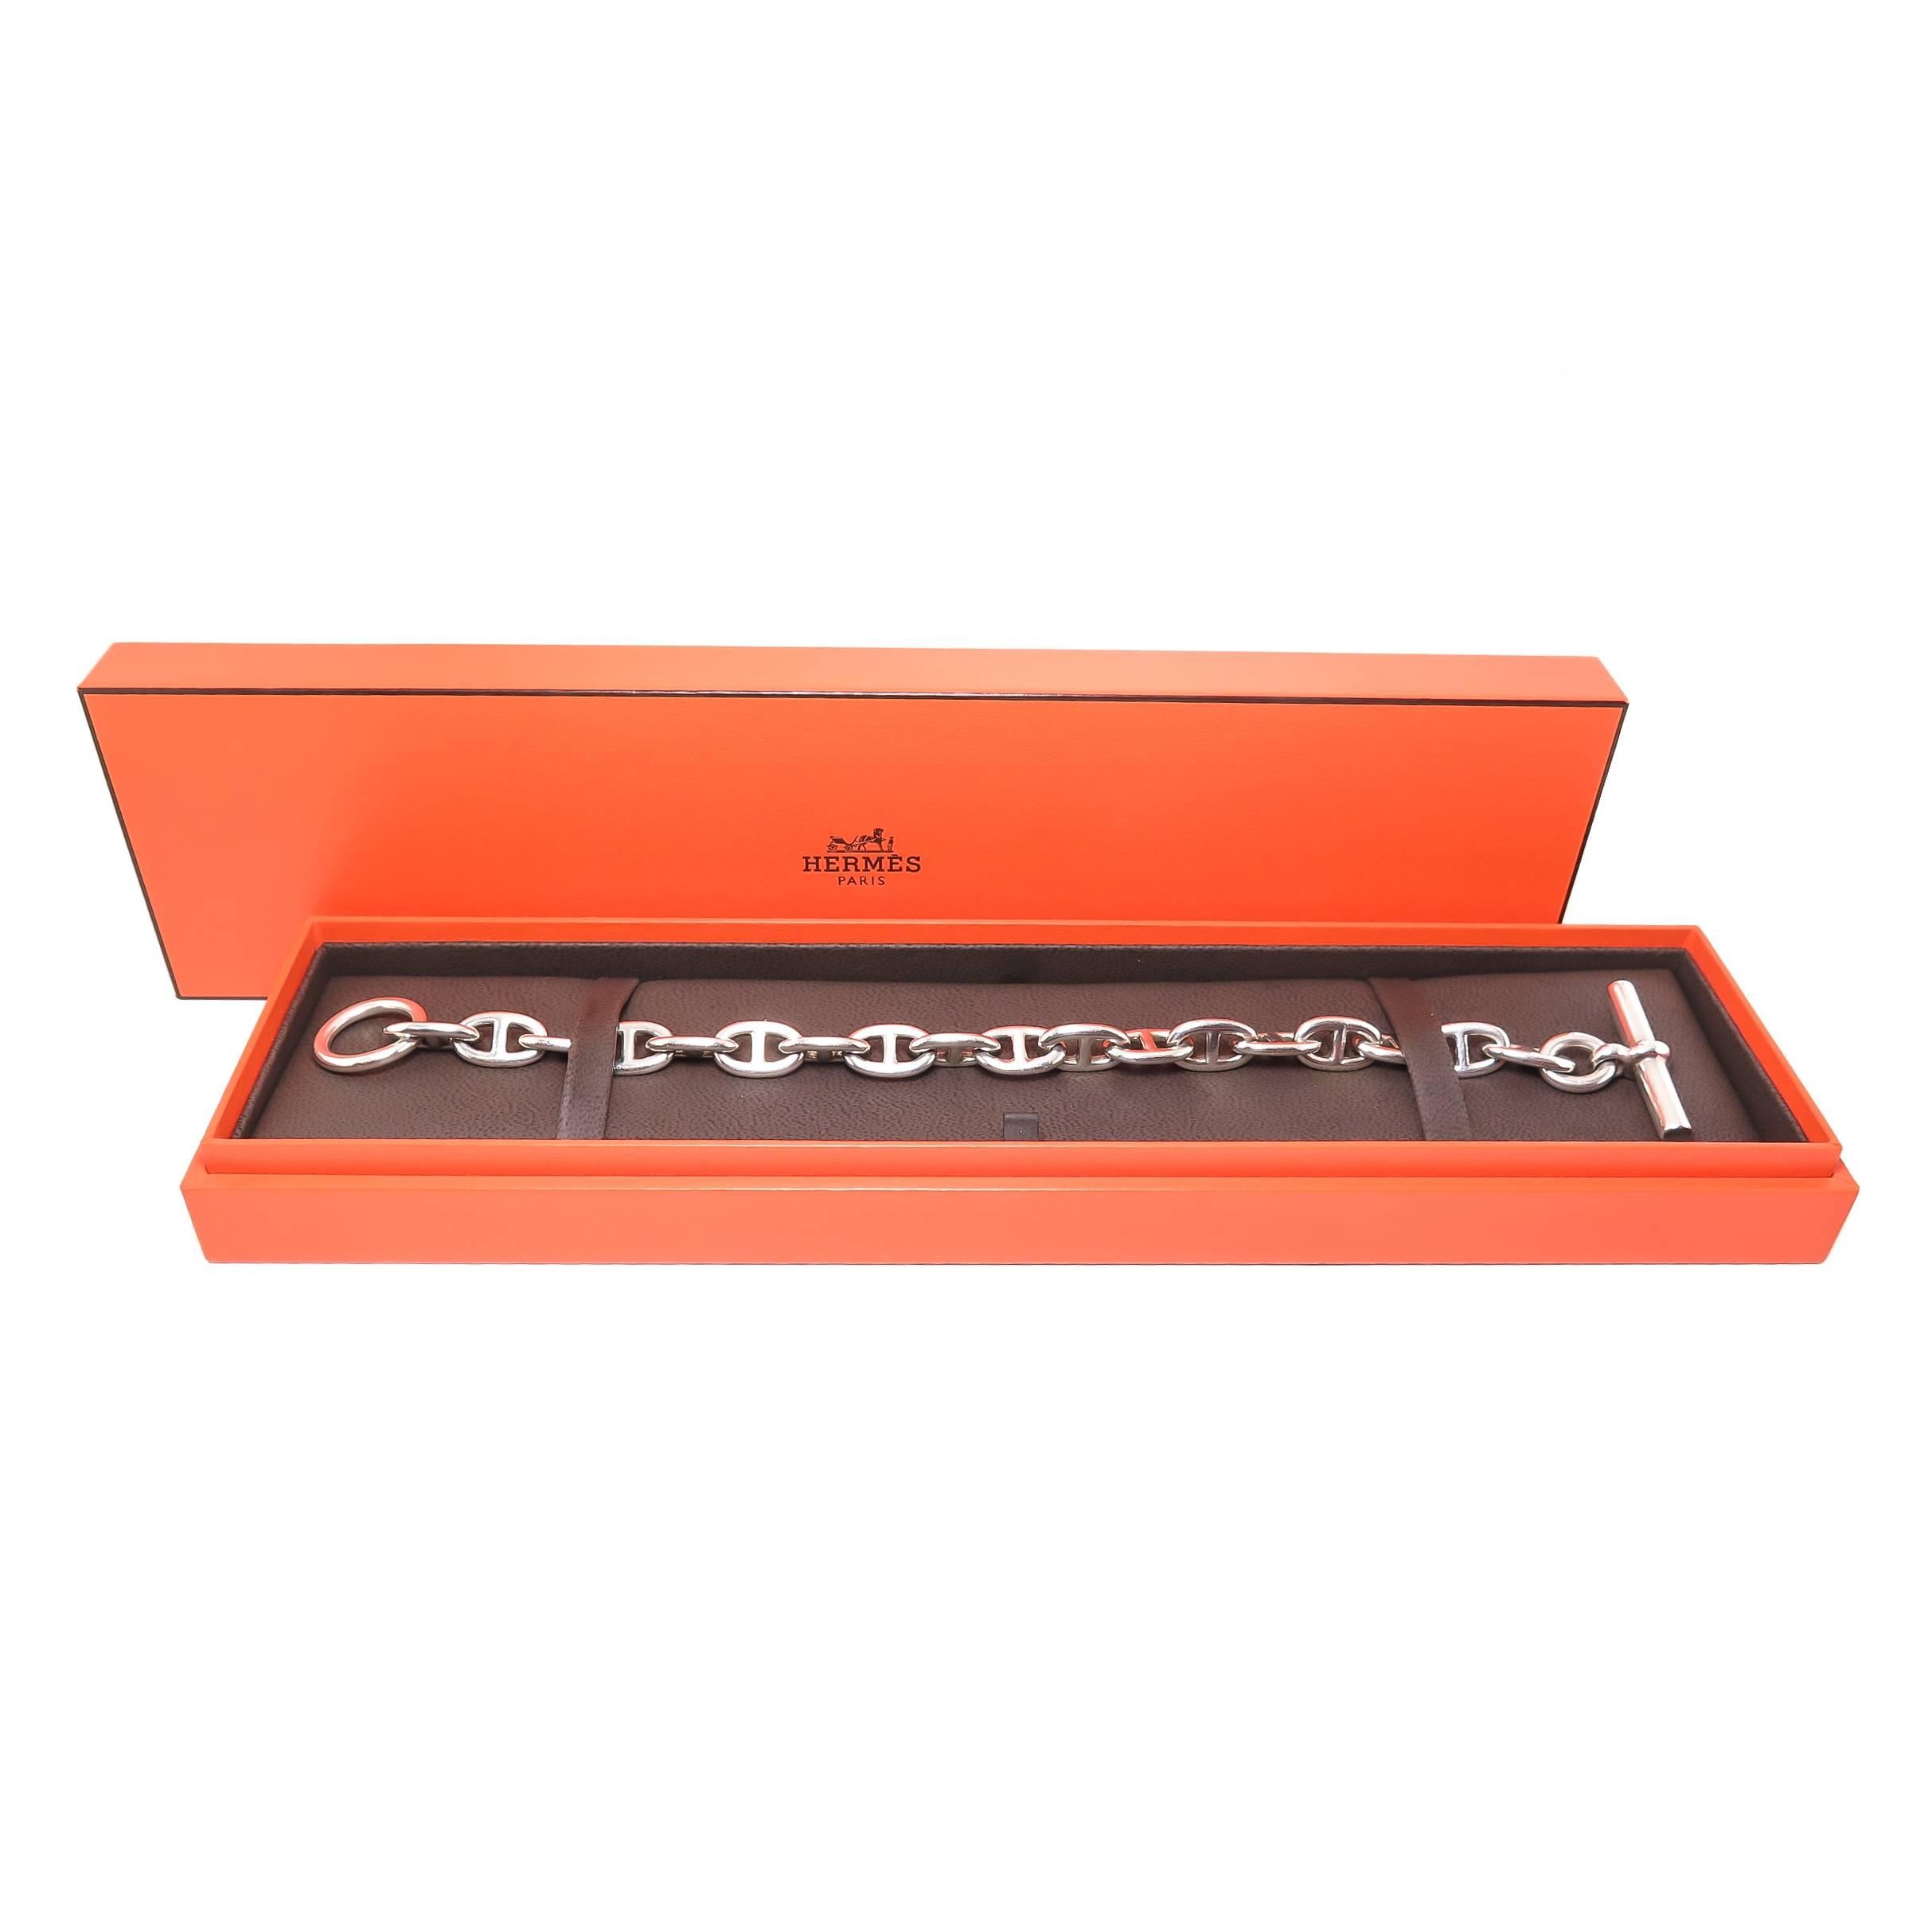 Circa 2000 Hermes Chain D Ancre Sterling Silver Bracelet, measuring 7 1/4 inch in length and 5/8 inch wide. Comes in the original Hermes presentation box.